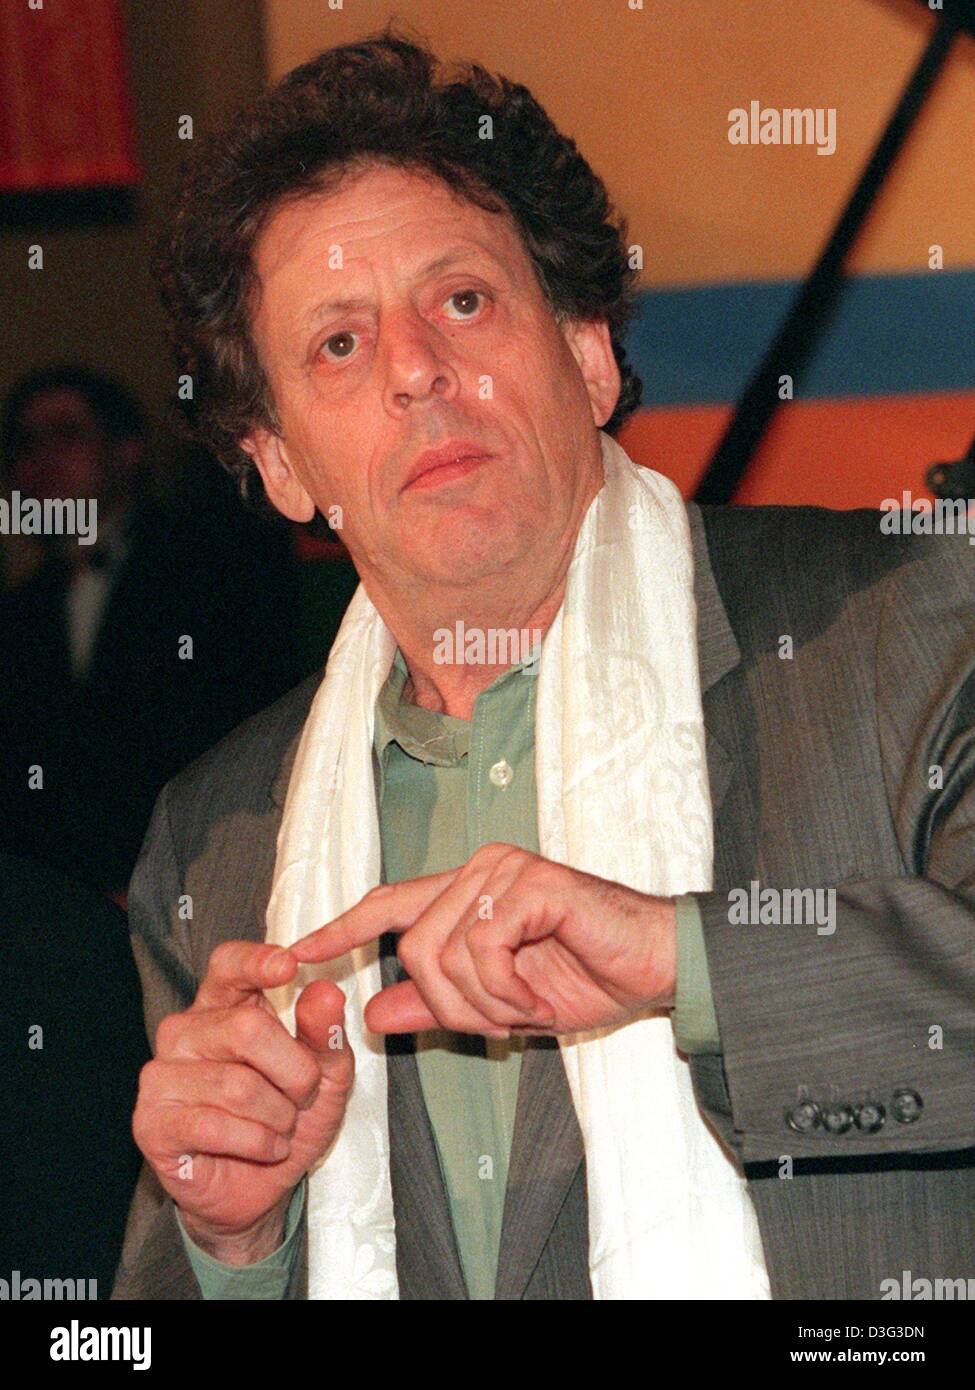 (dpa files) - US composer Philip Glass ('Koyaanisqatsi') photographed at the German premiere of his film 'Kundun' in Munich, 11 March 1998. Philip Glass was nominated for this year's Oscar for Best Original Score for his compositions for 'The Hours'. The Academy Awards will be presented on 23 March 2003 in Hollywood. Stock Photo